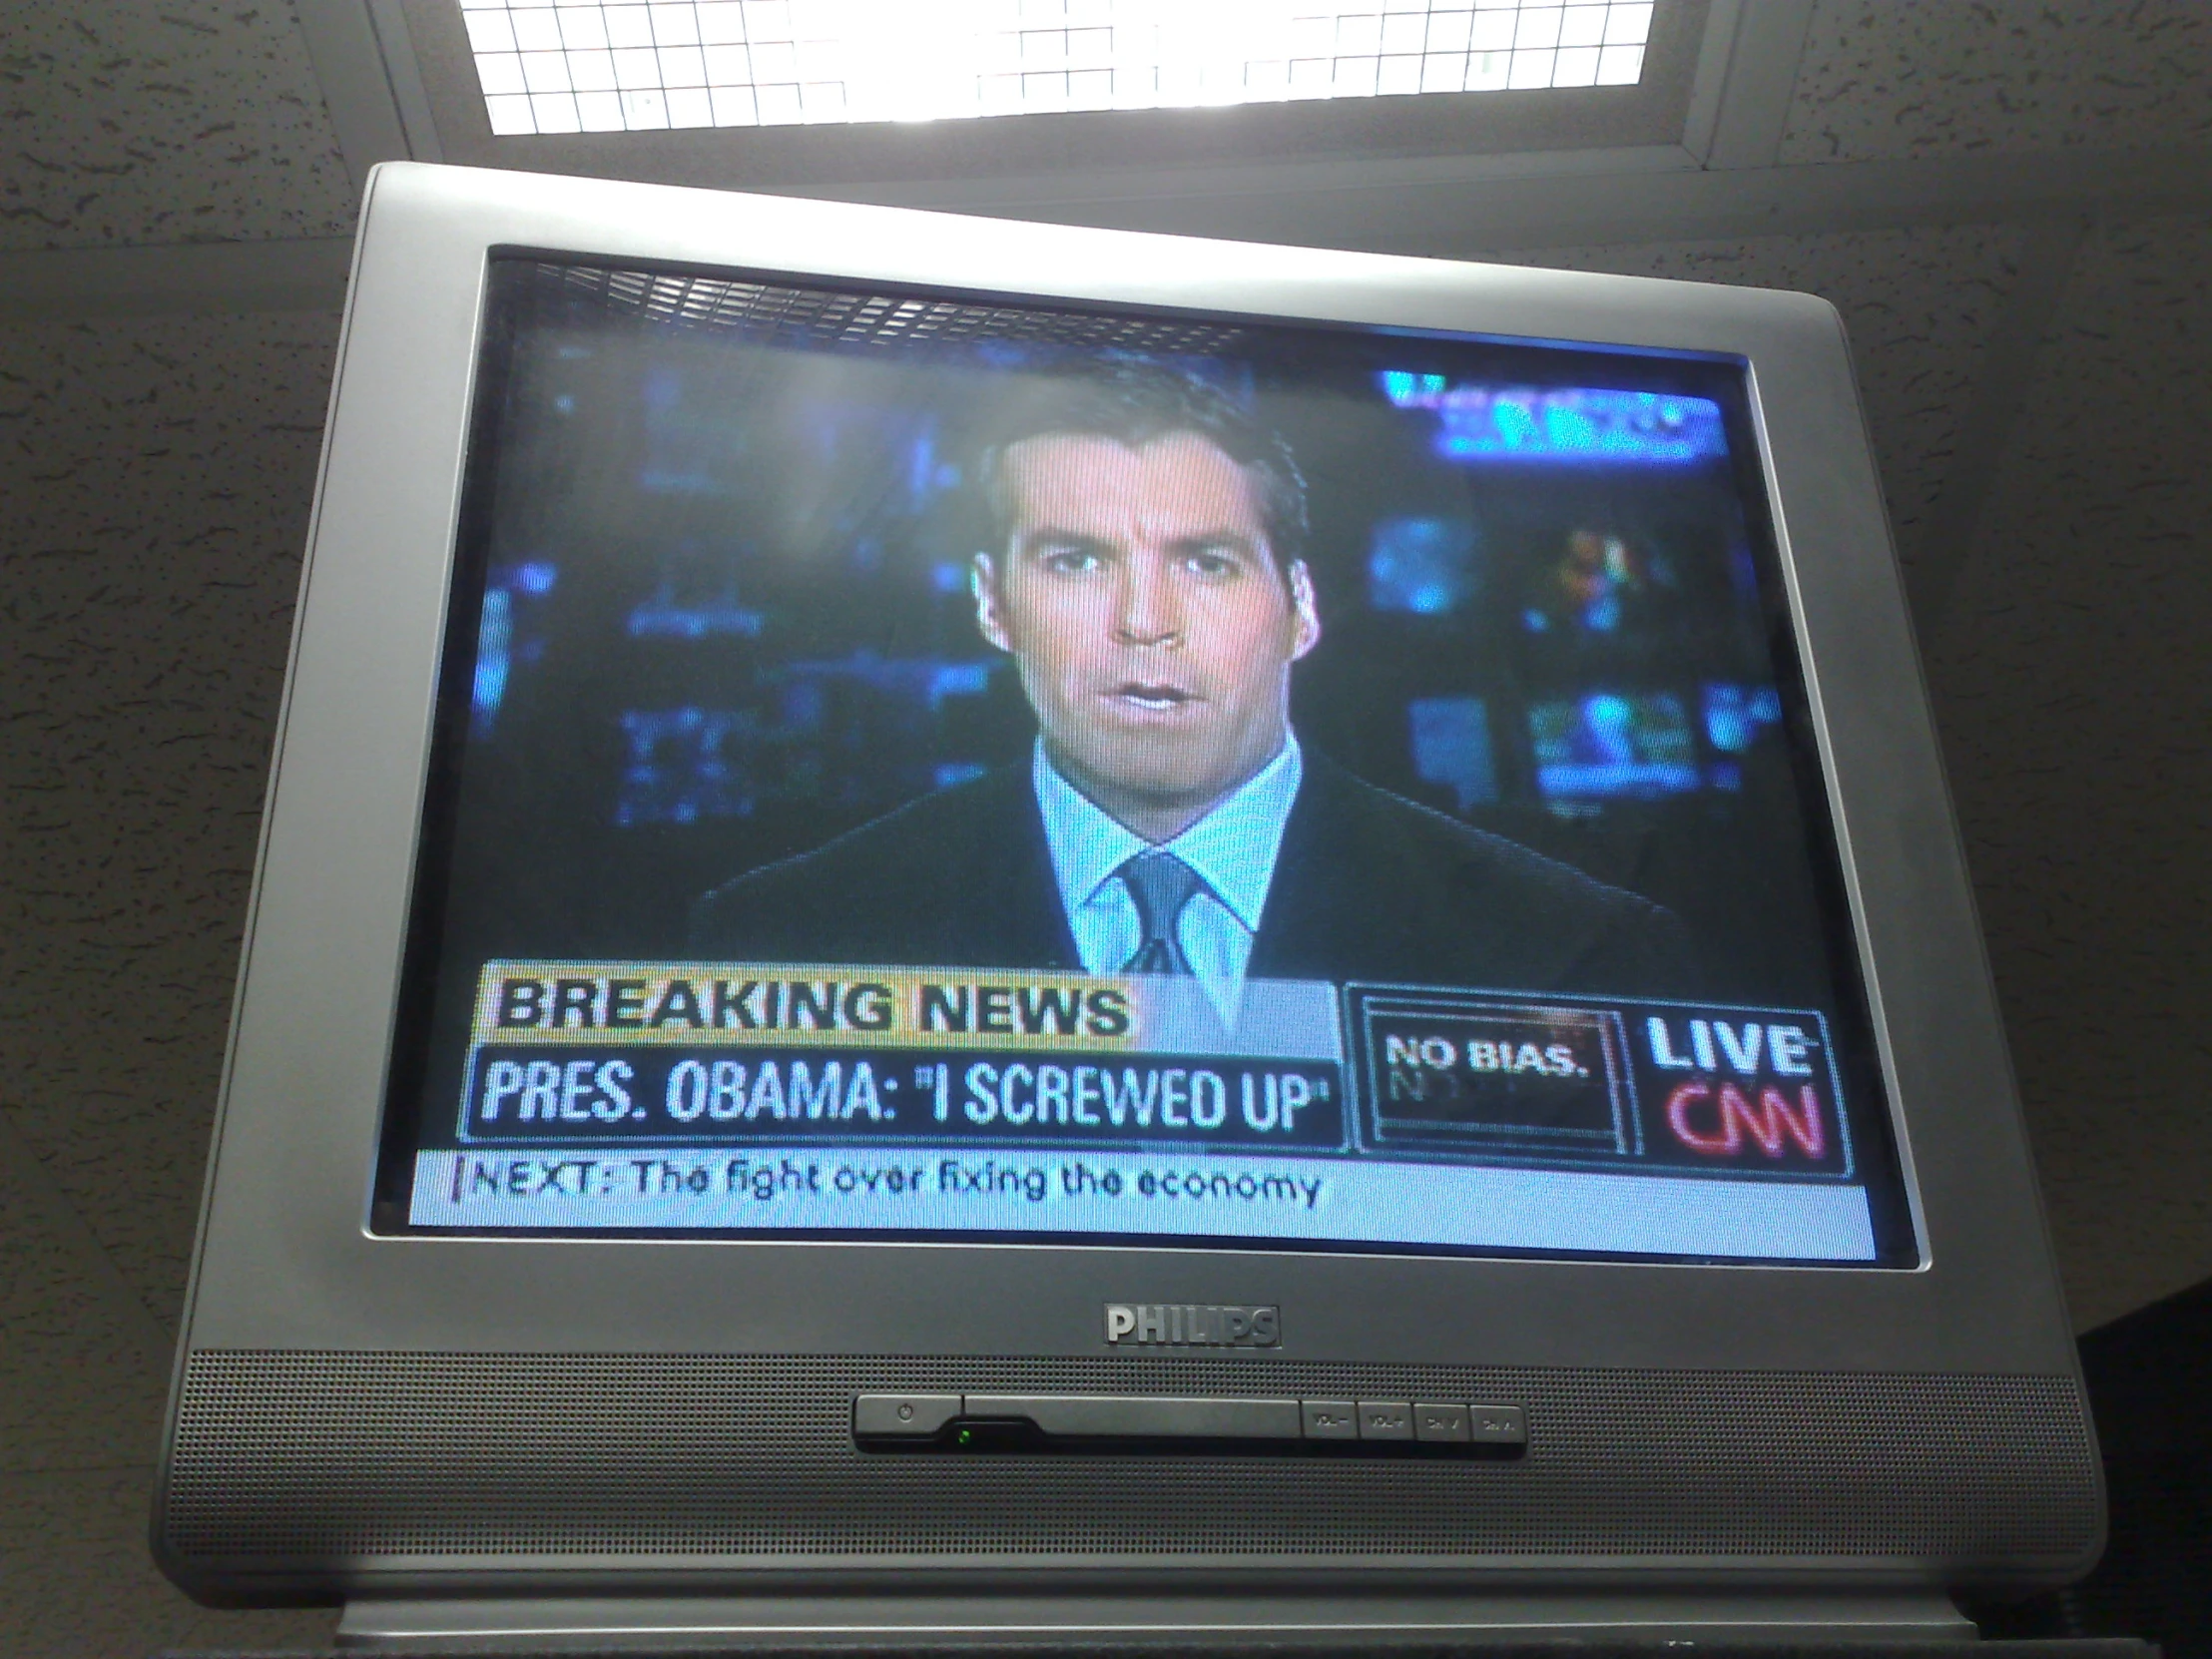 the tv is showing an old anchor for breaking news